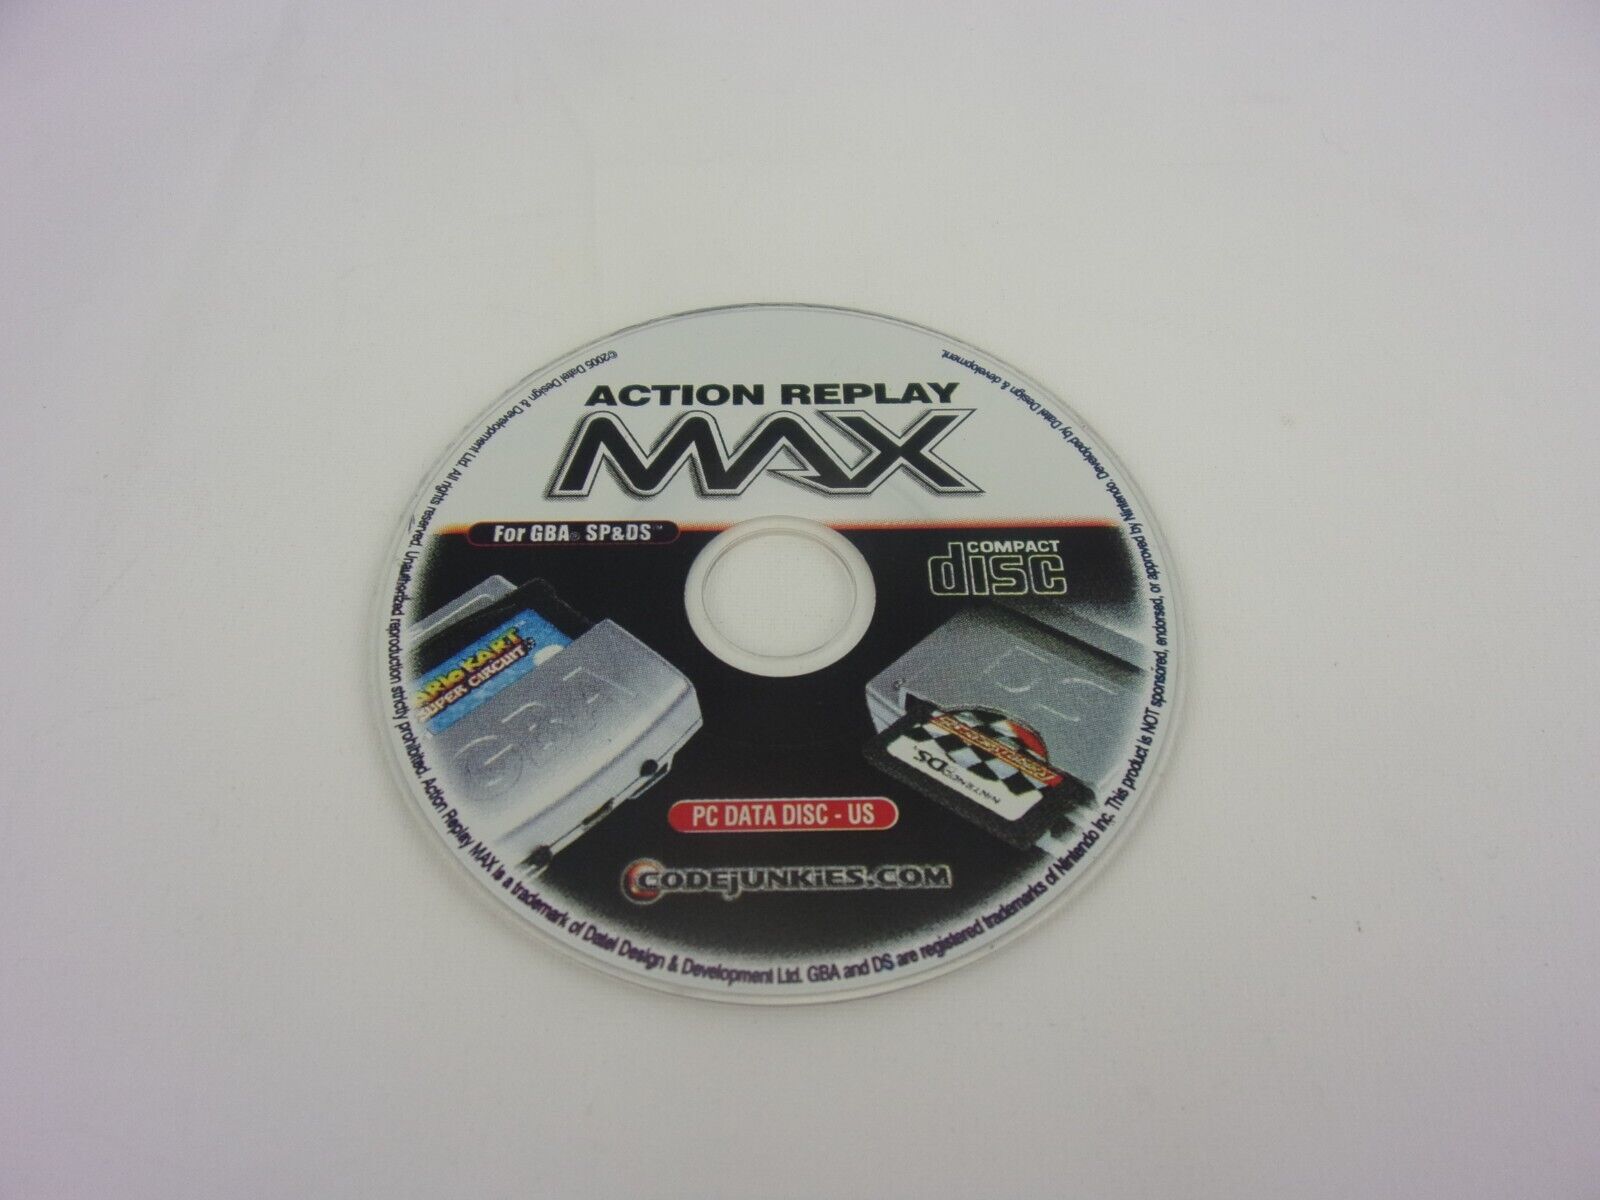 Action Replay MAX for GBA, SP & DS PC Data Disc U.S. Disc only